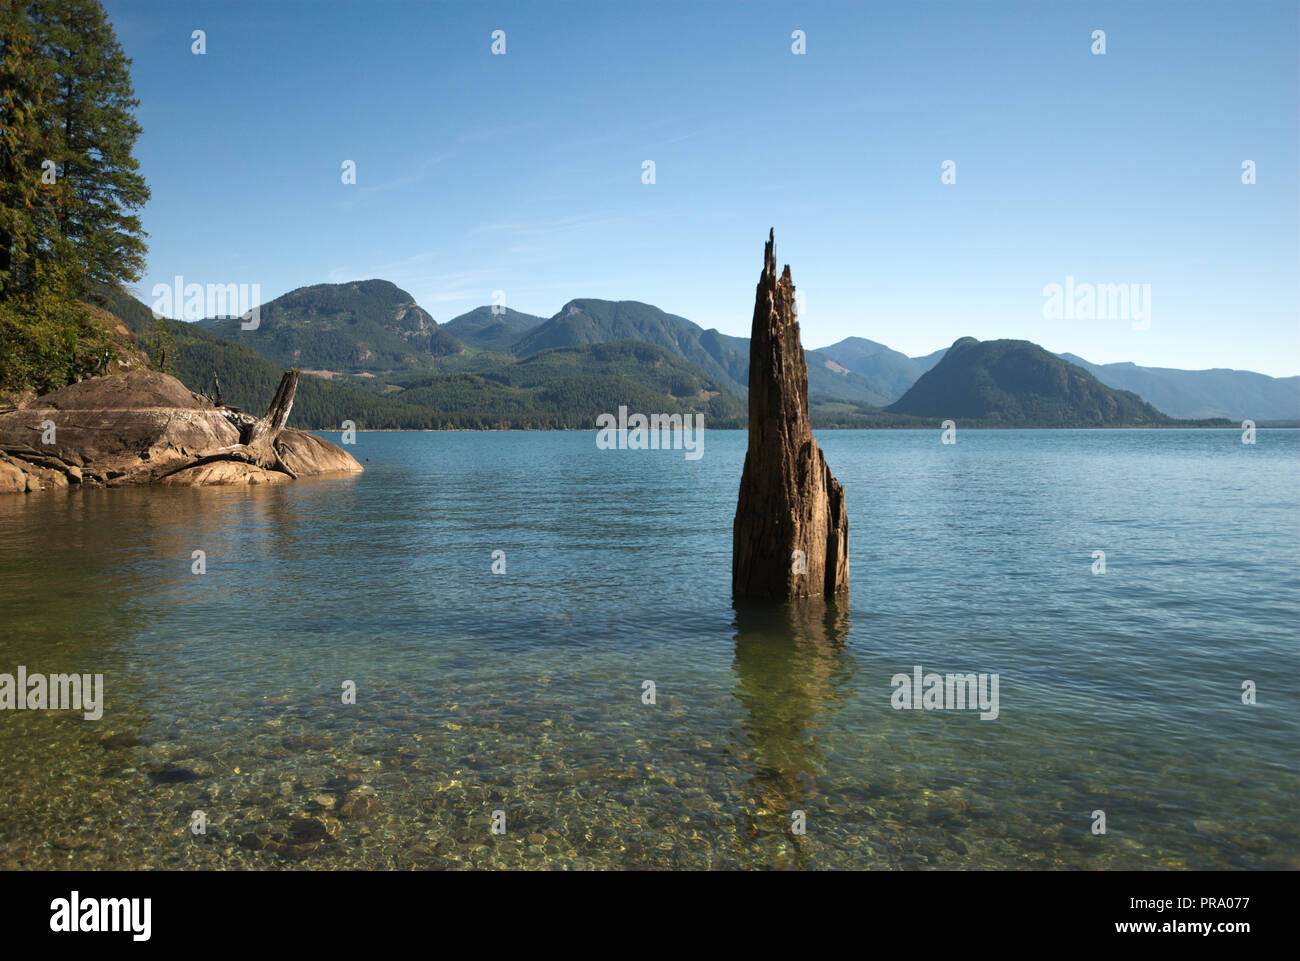 Lonely sentinel at Stave Lake in Mission, British Columbia, Canada Stock Photo